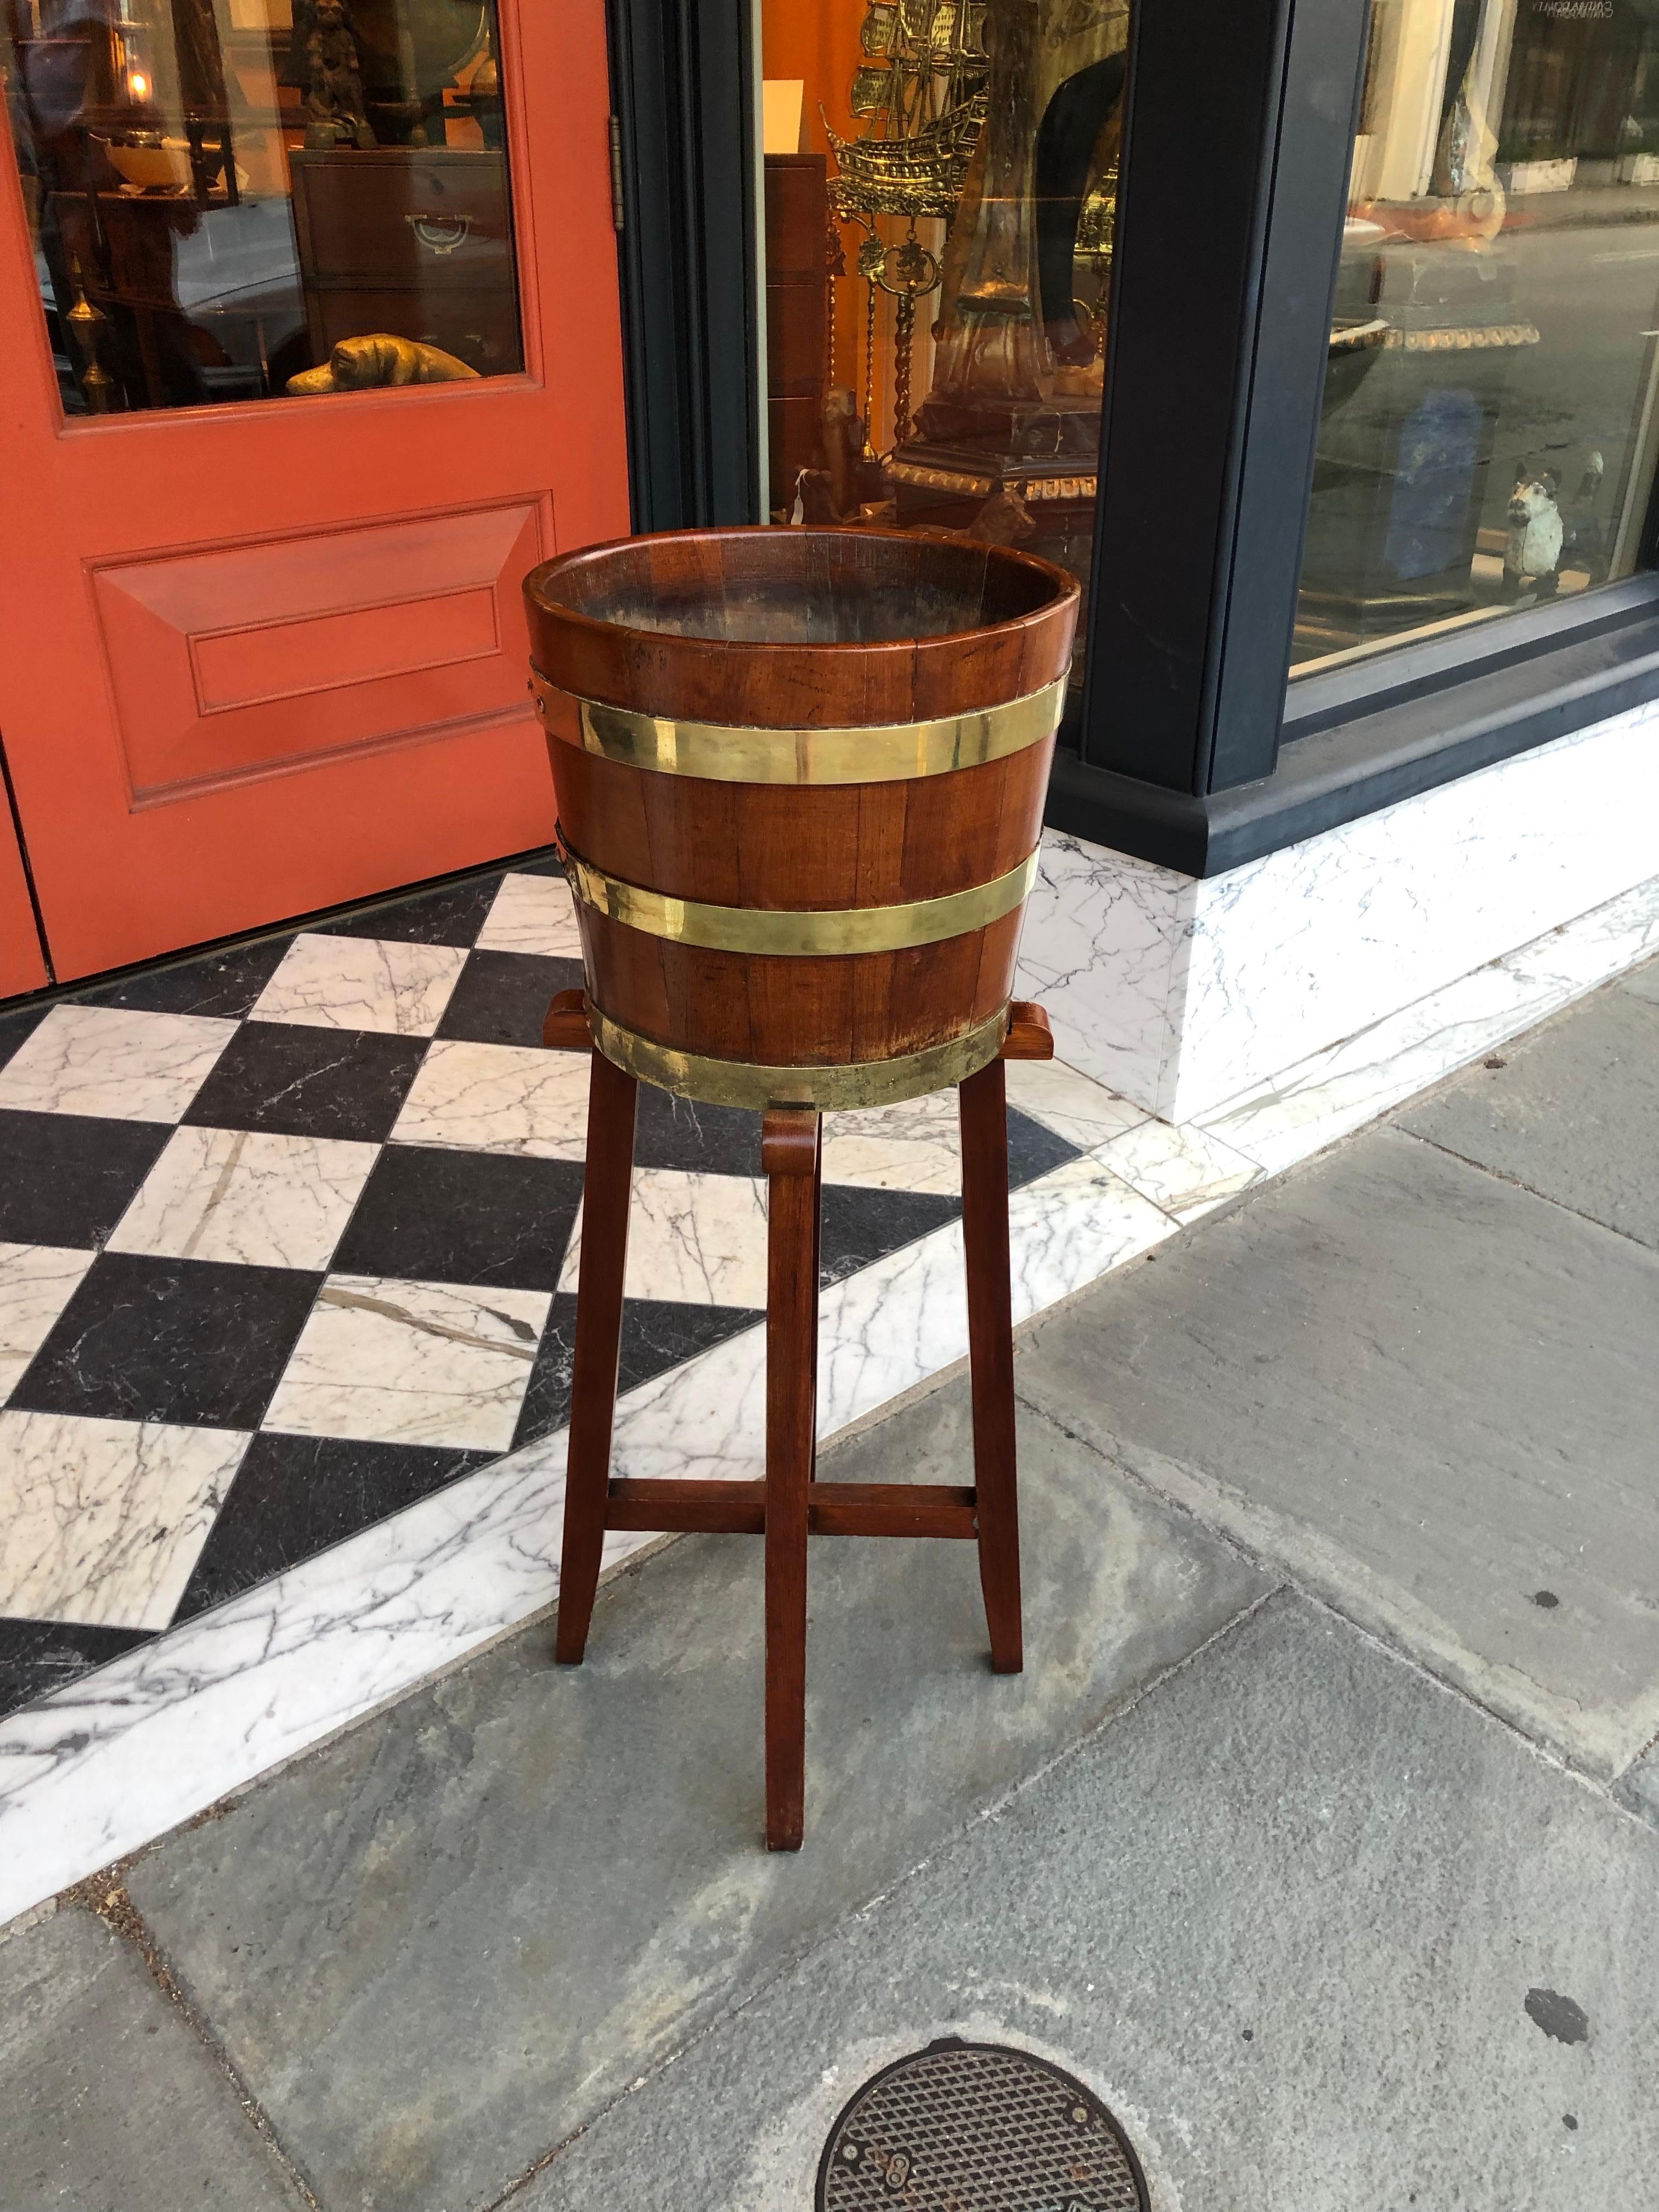 Oak brass bound English bucket on stand for planter or wine.